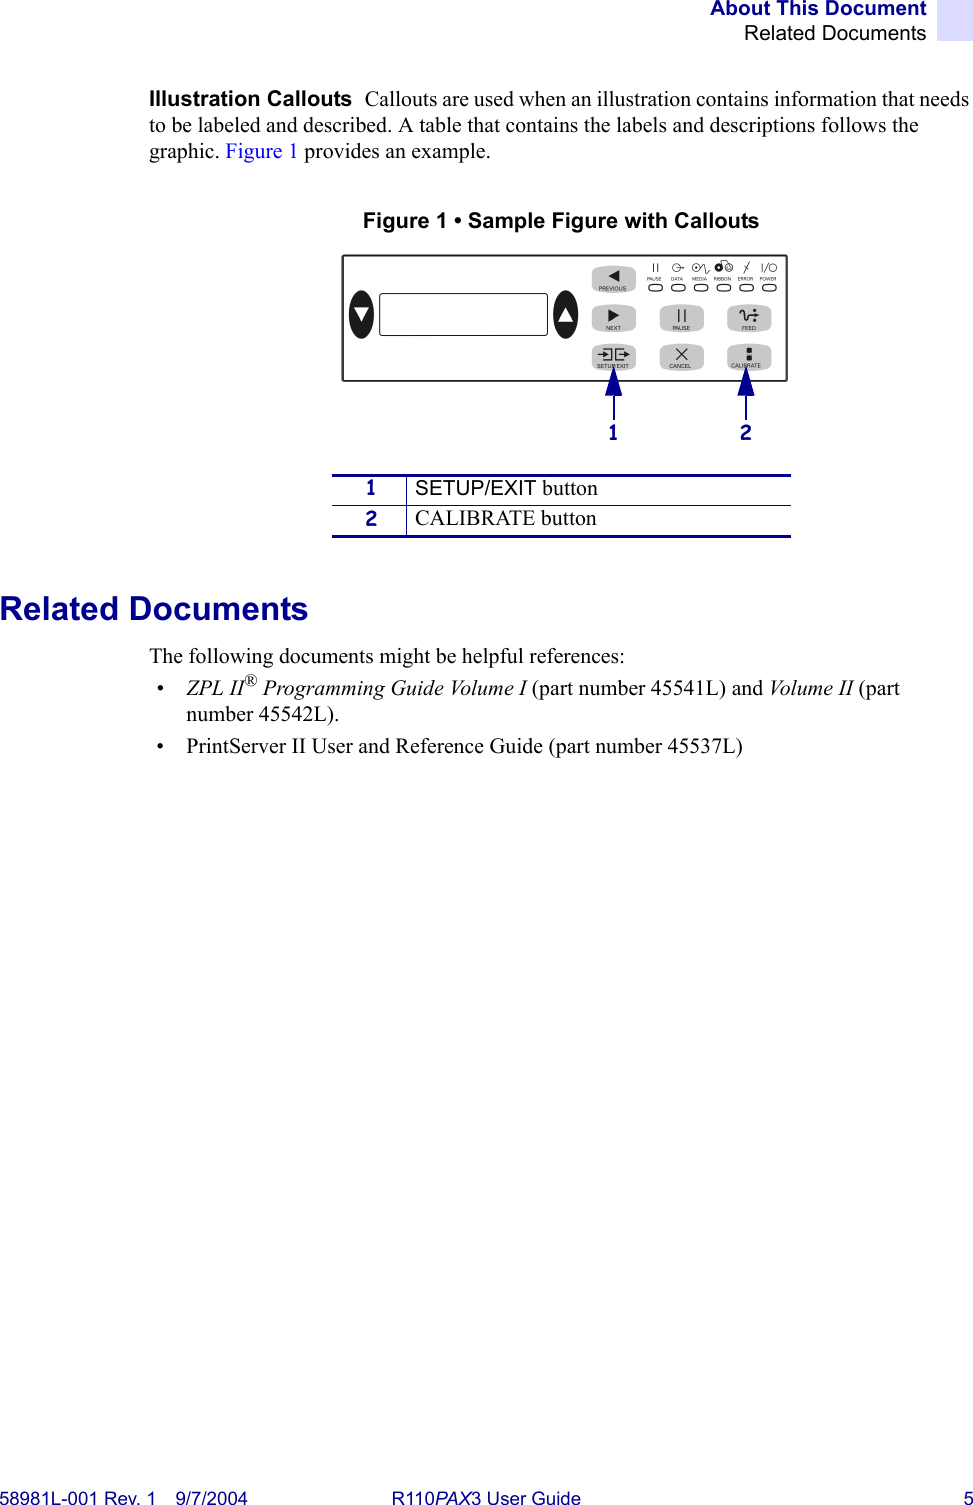 About This DocumentRelated Documents58981L-001 Rev. 1 9/7/2004 R110PAX3 User Guide 5Illustration Callouts  Callouts are used when an illustration contains information that needs to be labeled and described. A table that contains the labels and descriptions follows the graphic. Figure 1 provides an example.Figure 1 • Sample Figure with CalloutsRelated DocumentsThe following documents might be helpful references:•ZPL II® Programming Guide Volume I (part number 45541L) and Vo l u m e  I I  (part number 45542L).• PrintServer II User and Reference Guide (part number 45537L)1SETUP/EXIT button2CALIBRATE button21